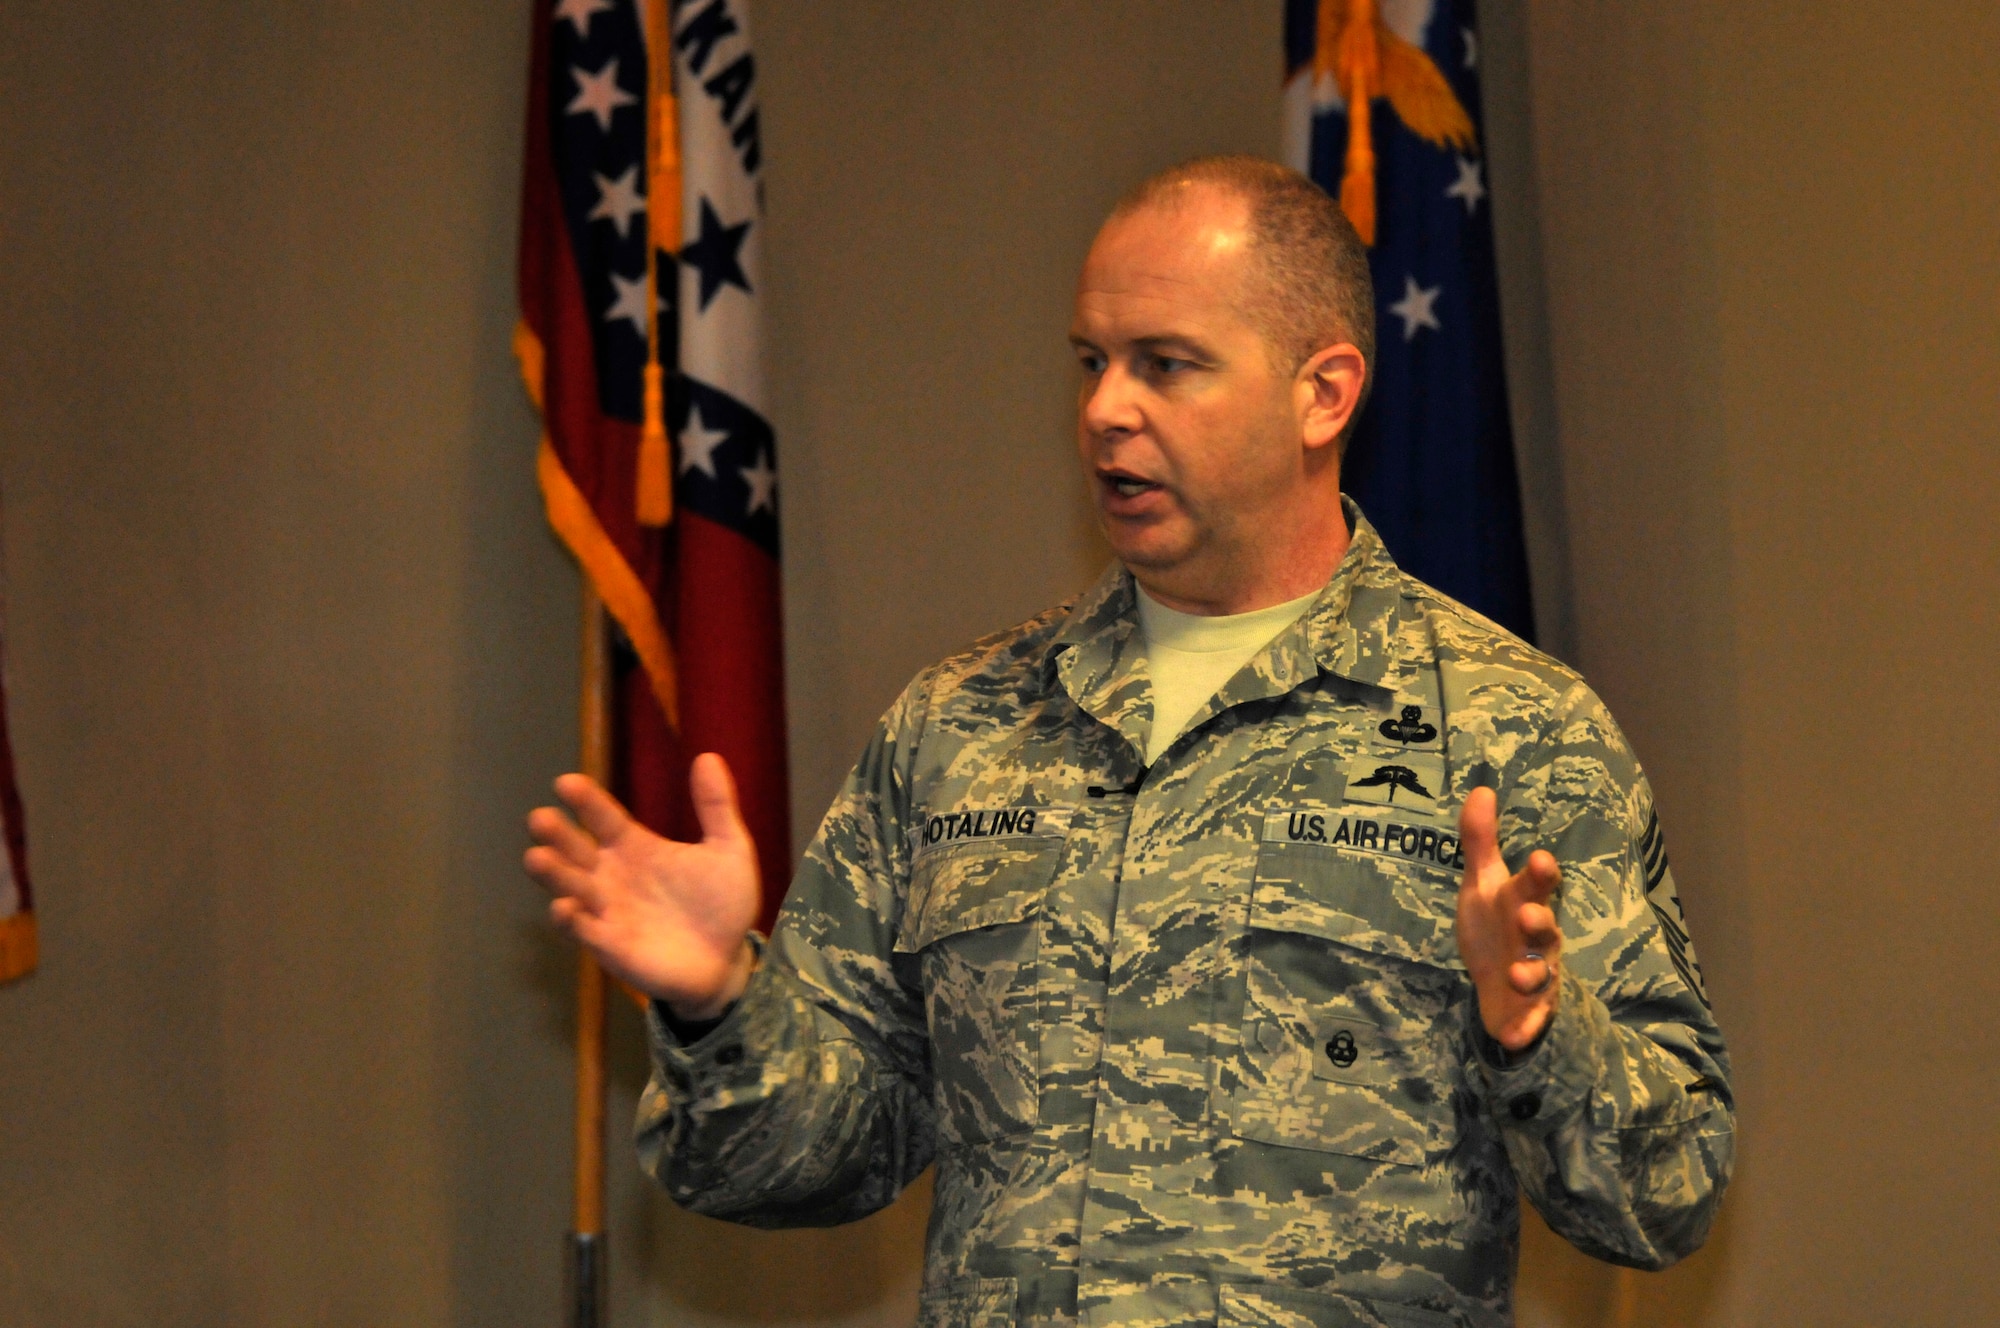 Air National Guard Command Chief Master Sgt. James W. Hotaling speaks to the Airmen of the 188th Fighter Wing at Ebbing Air National Guard Base, Fort Smith, Ark., April 5, 2014. Chief Master Sgt. Hotaling visited the 188th, met with Airmen and wing leadership before touring the unit’s facilities. (U.S. Air National Guard photo by Airman 1st Class Cody Martin/Released)